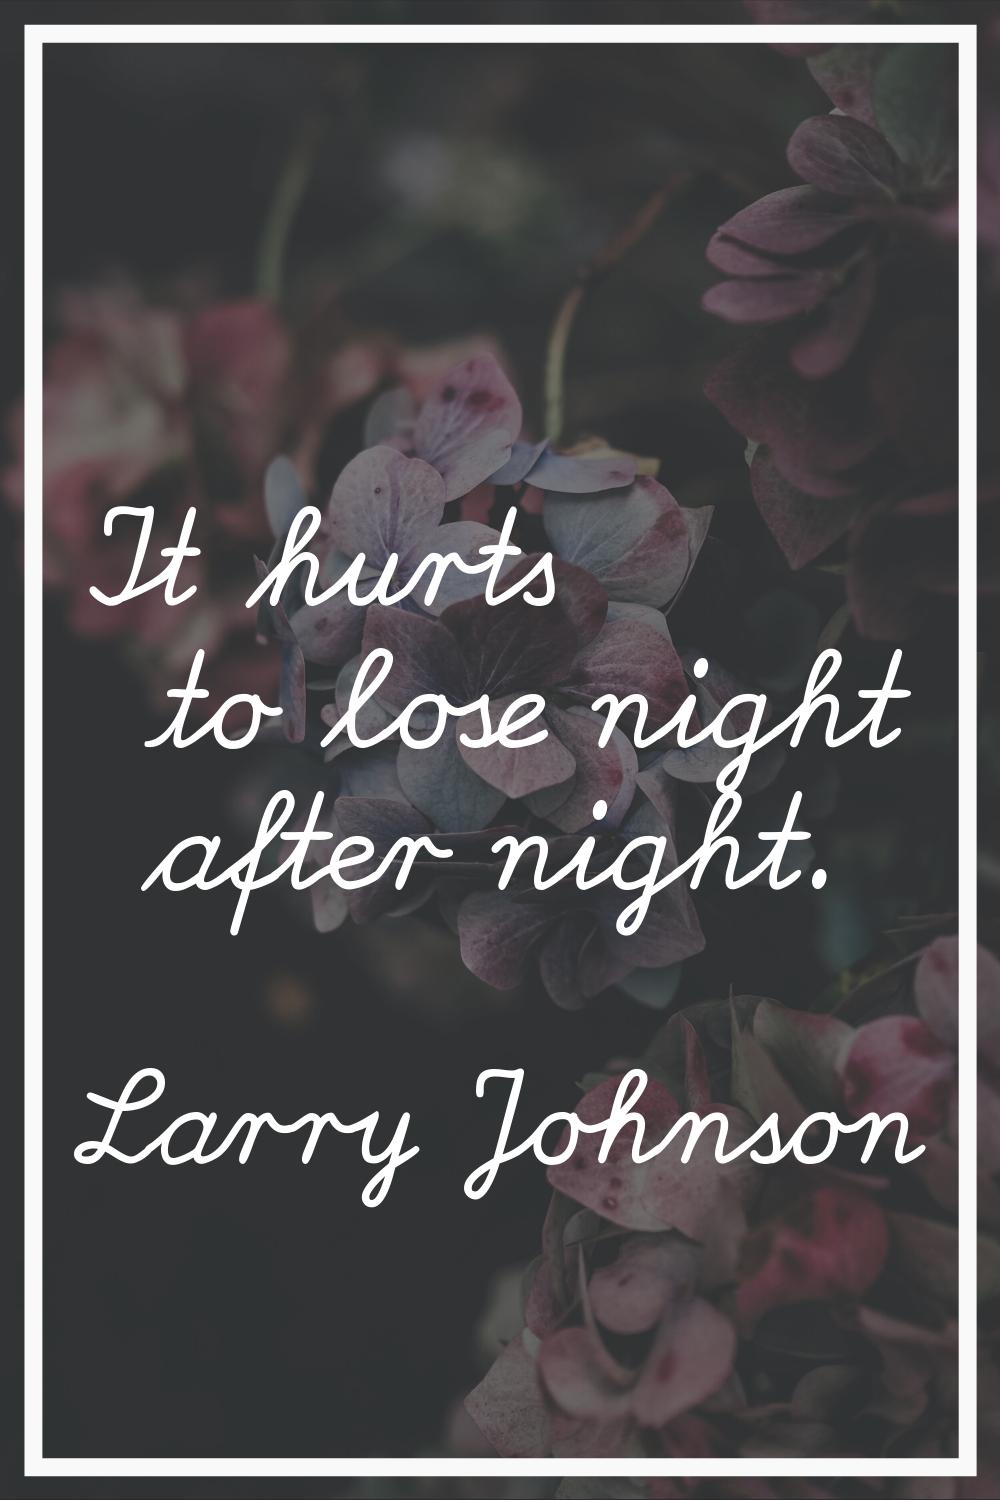 It hurts to lose night after night.